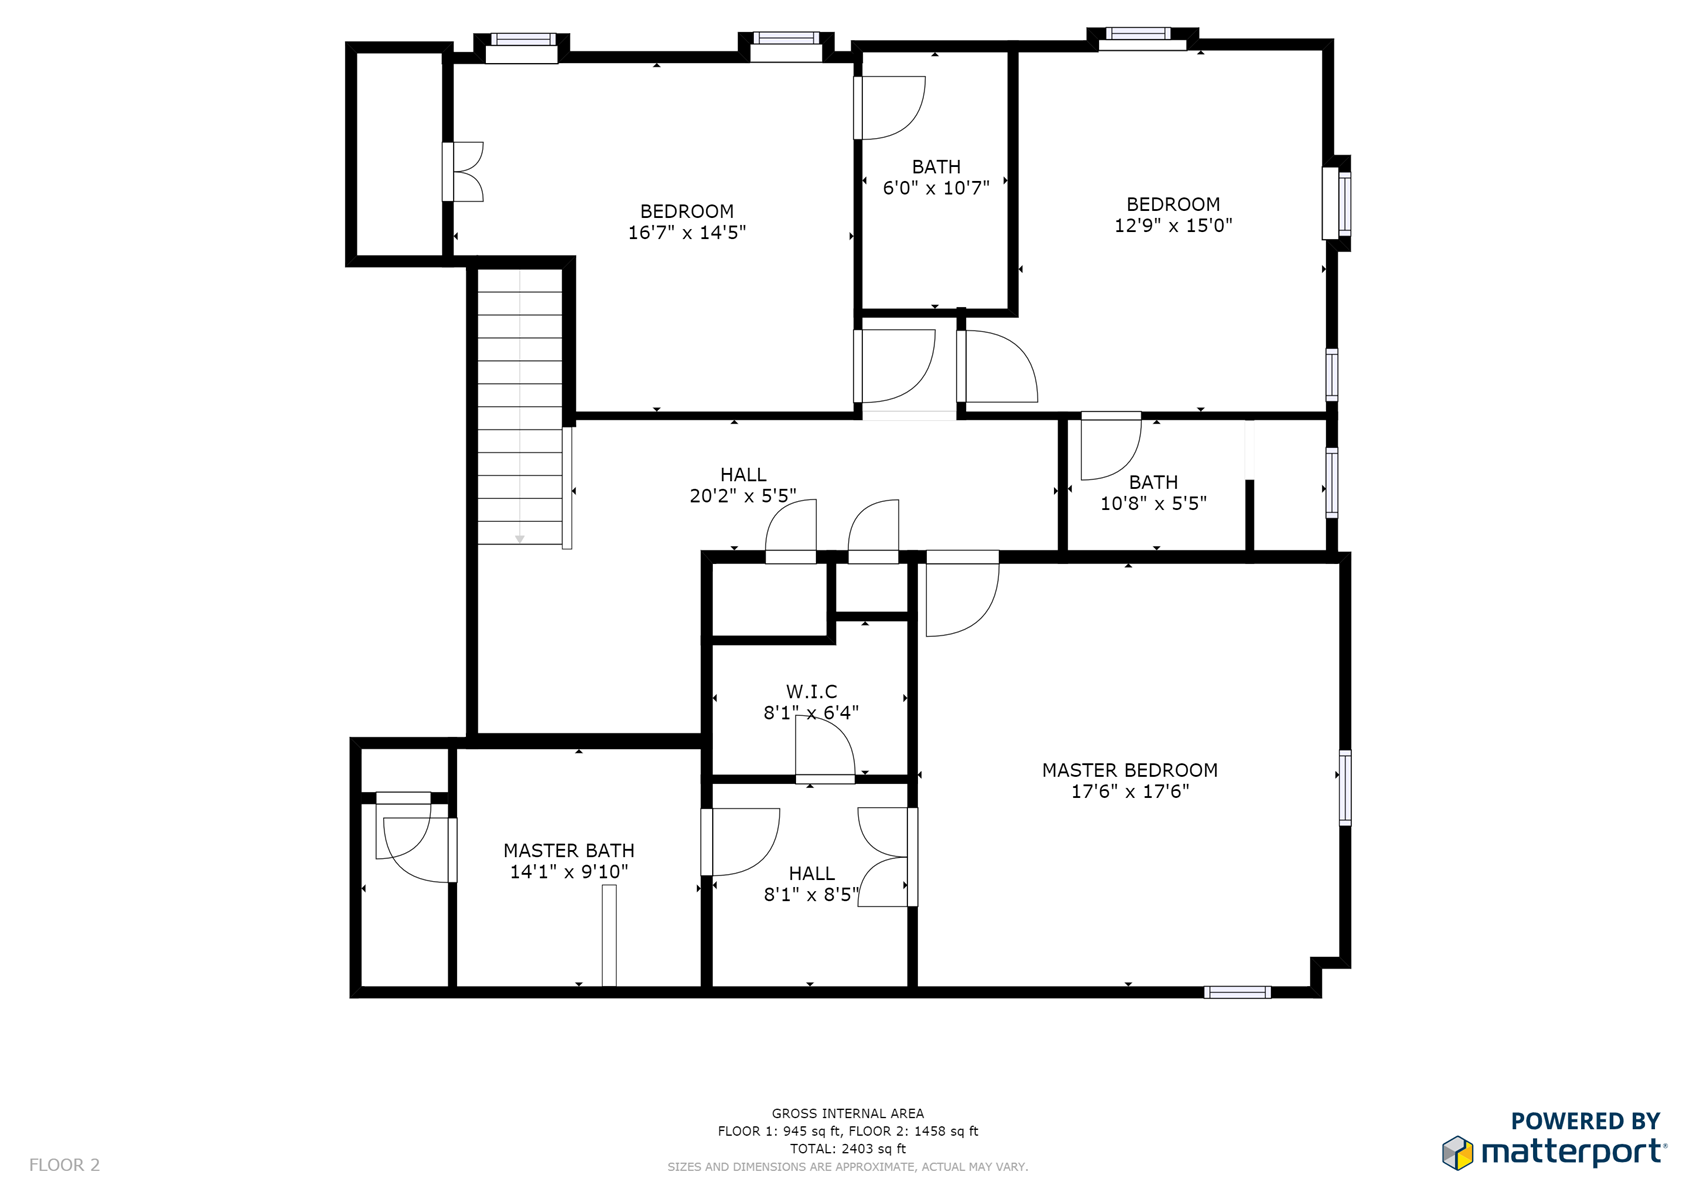 Floor Plan for Water Street Residence C: Located just 400 feet from the Plaza! 